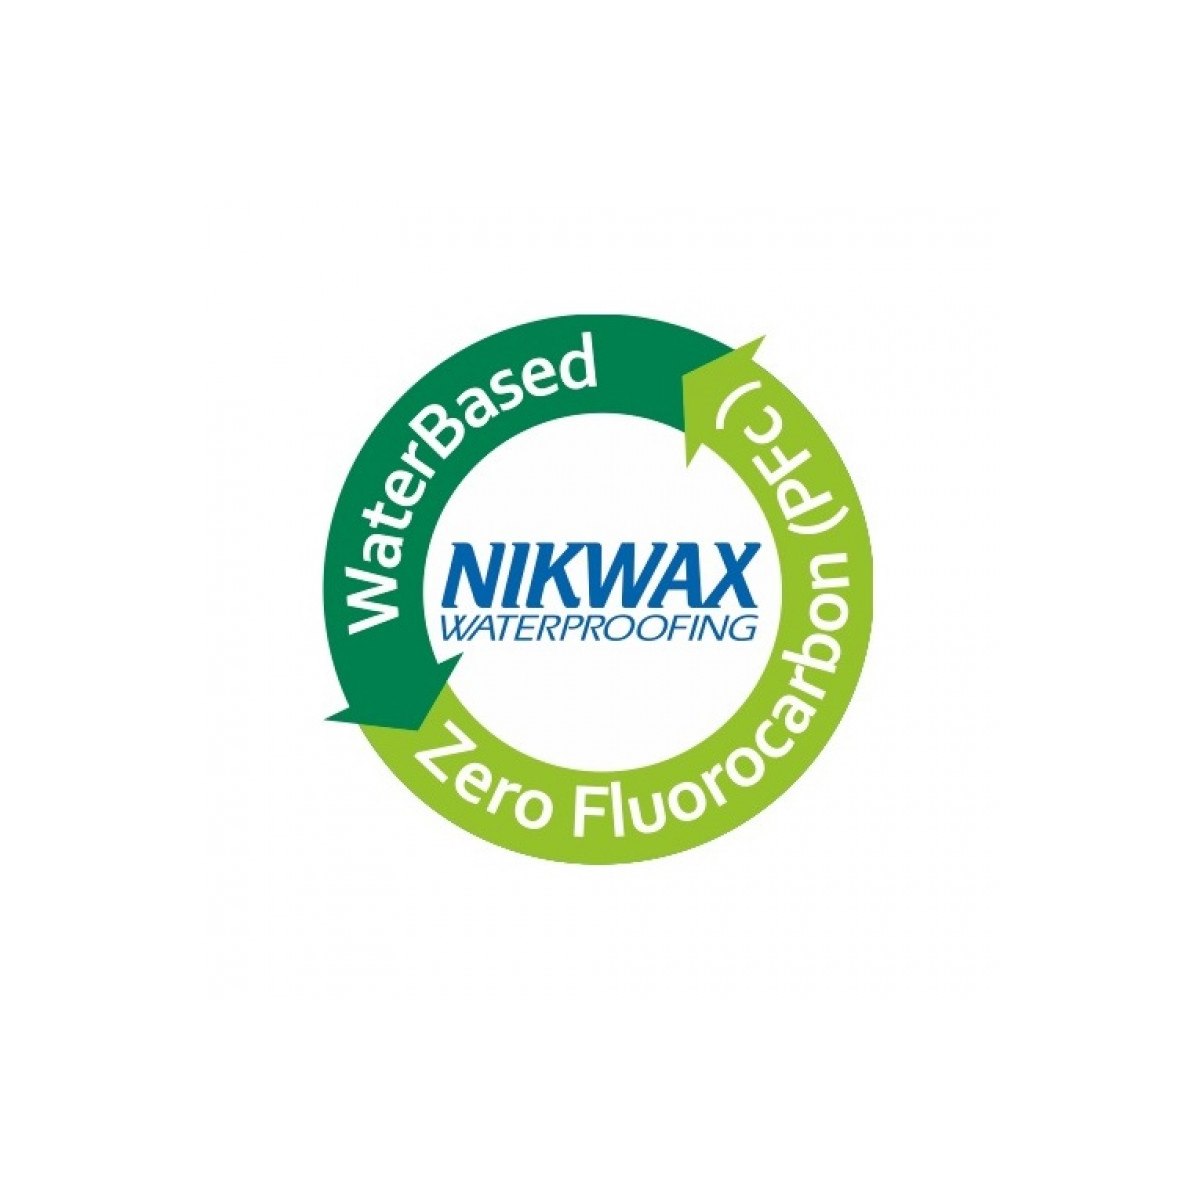 Nilwax Waterproofing Products